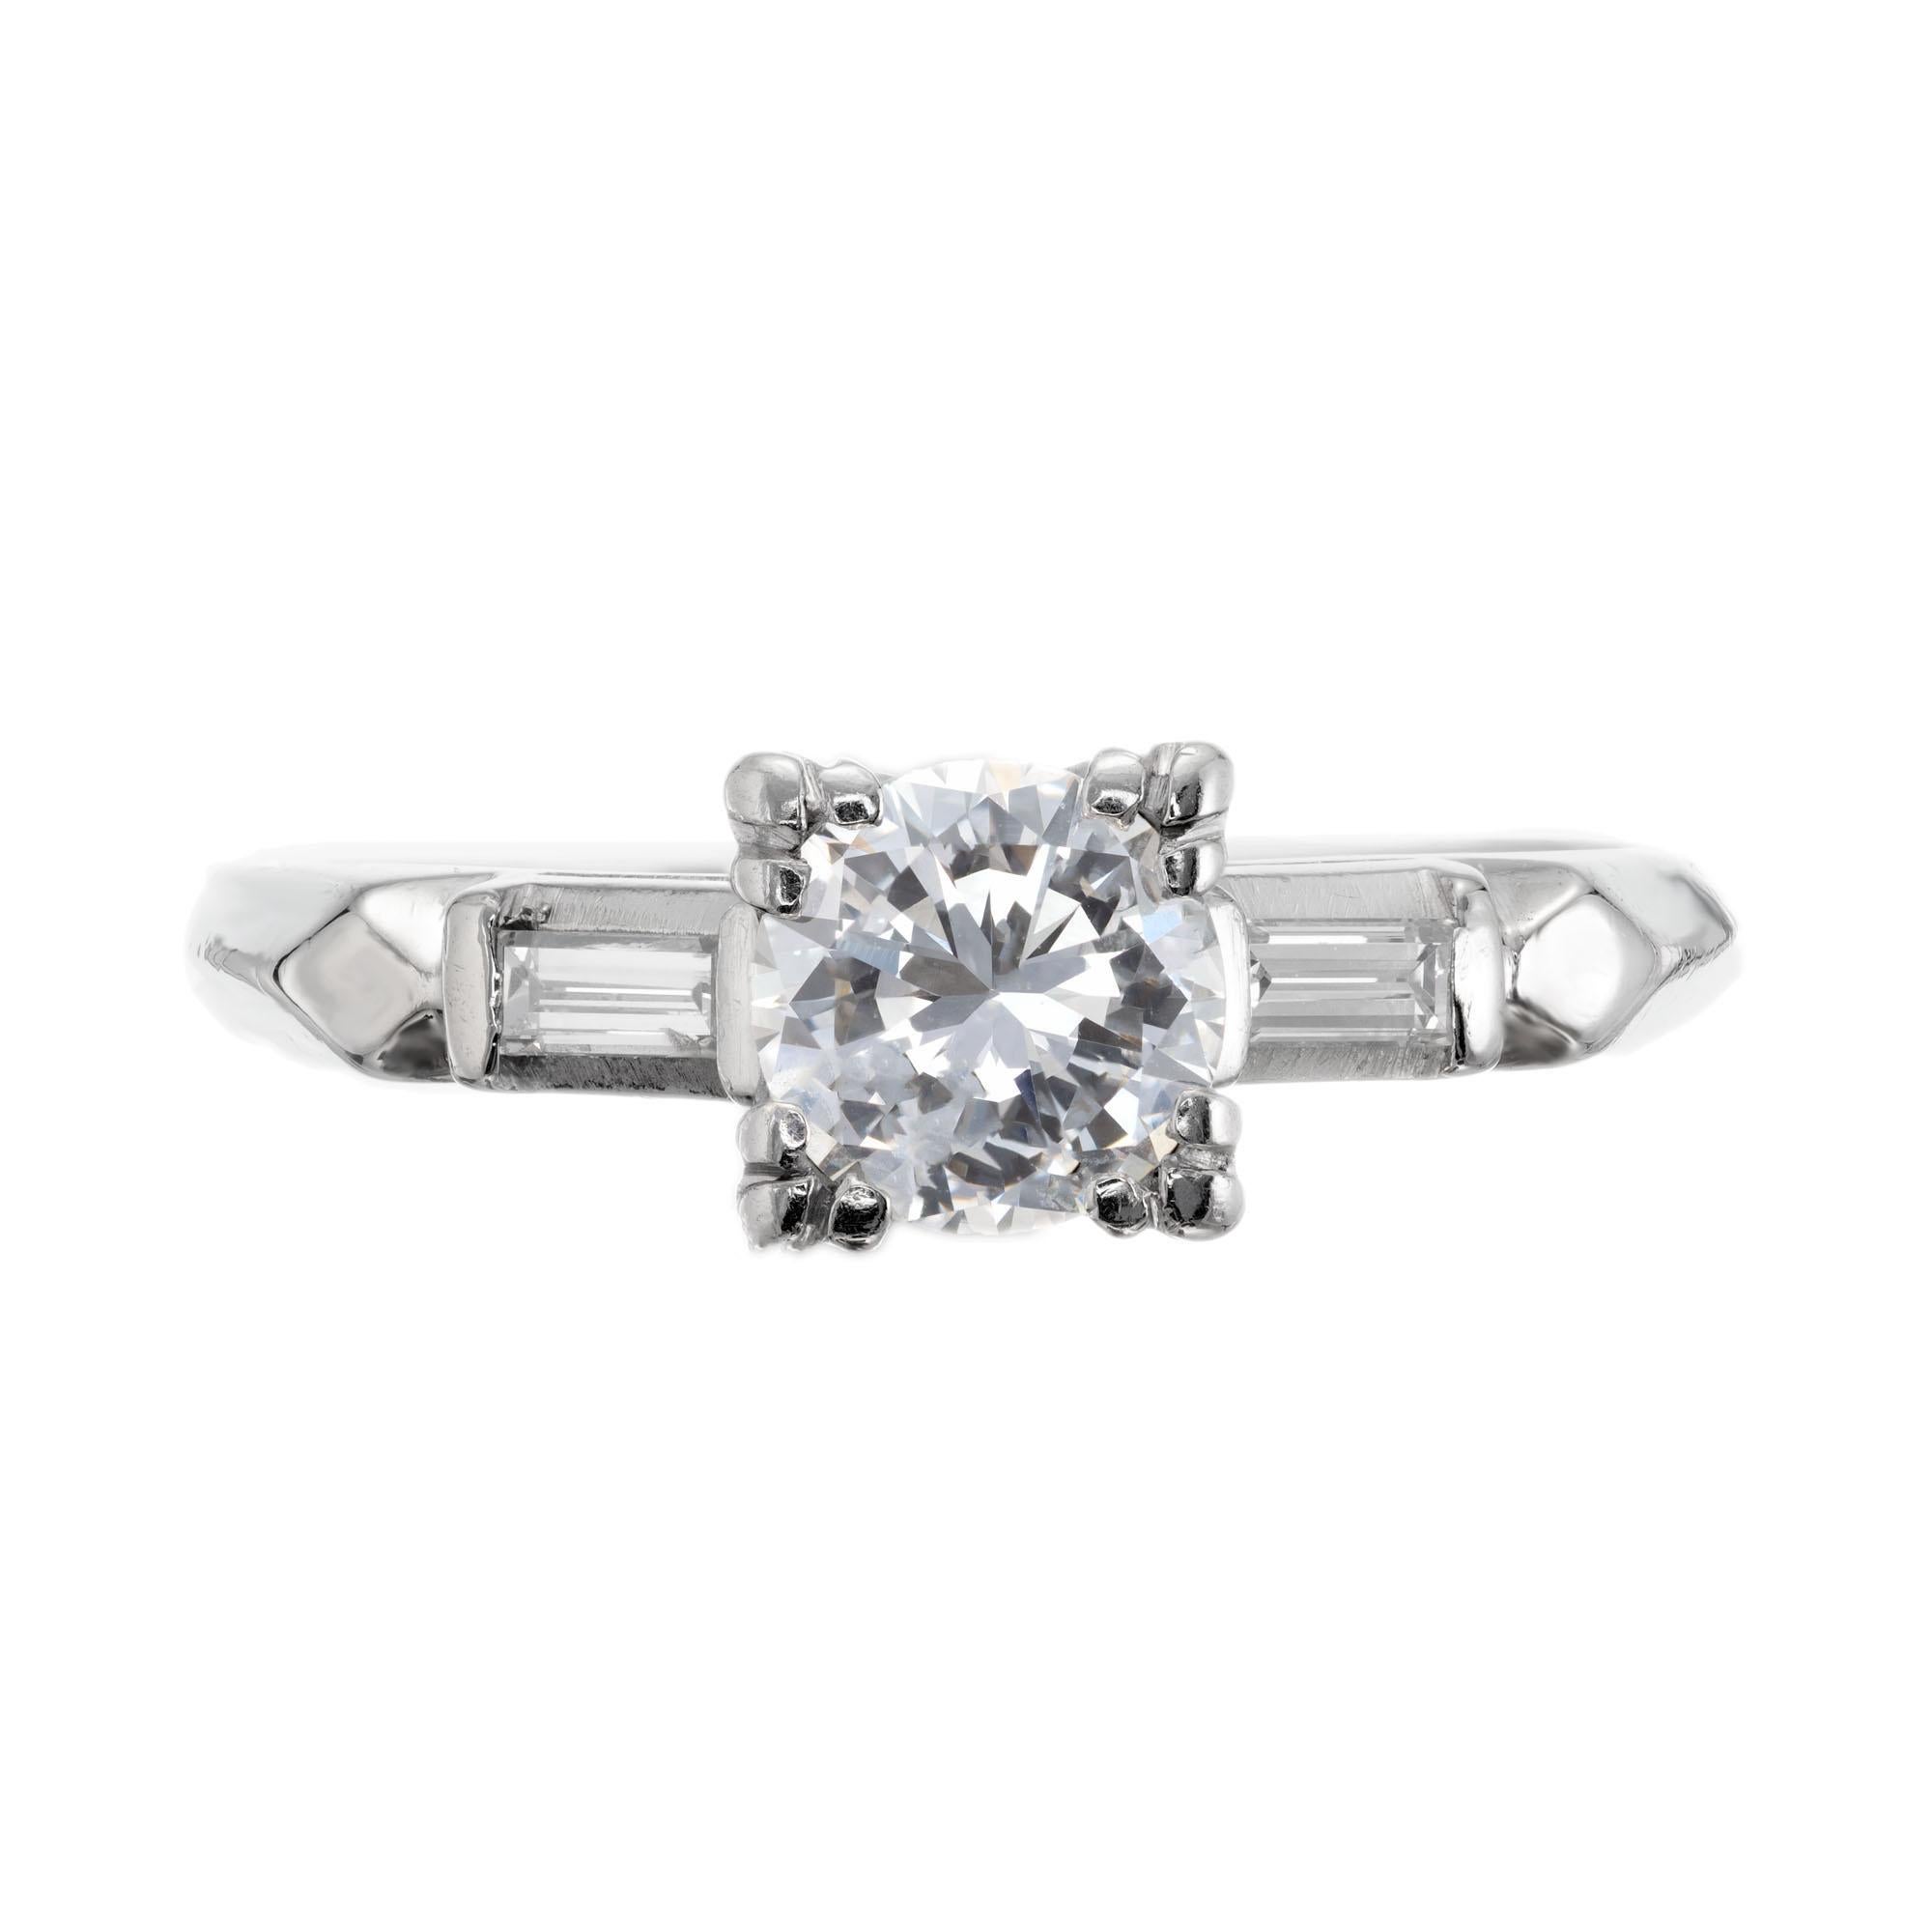 Art Deco diamond engagement ring. Transitional cut round center diamond set in platinum, three-stone stetting with two straight baguette cut accent diamonds. EGL certified. 

1 transitional cut diamond, approx. total weight .79cts, E to F color and